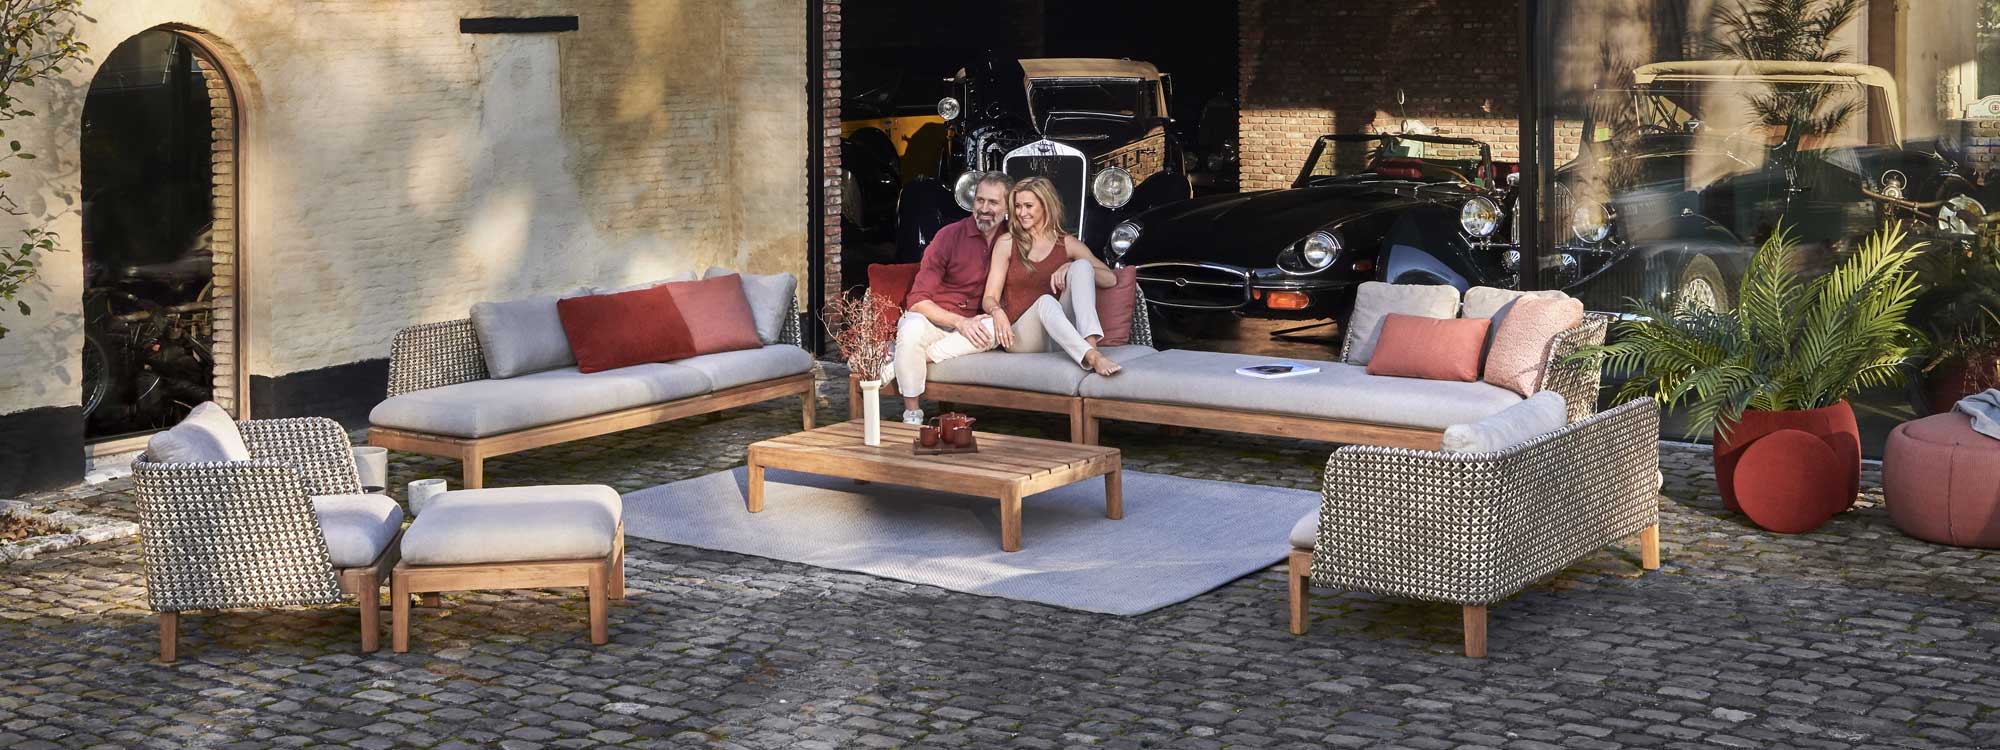 Image of Royal Botania Calypso garden lounge set with Kriss Kross woven backs, in cobbled courtyard with classic cars in background